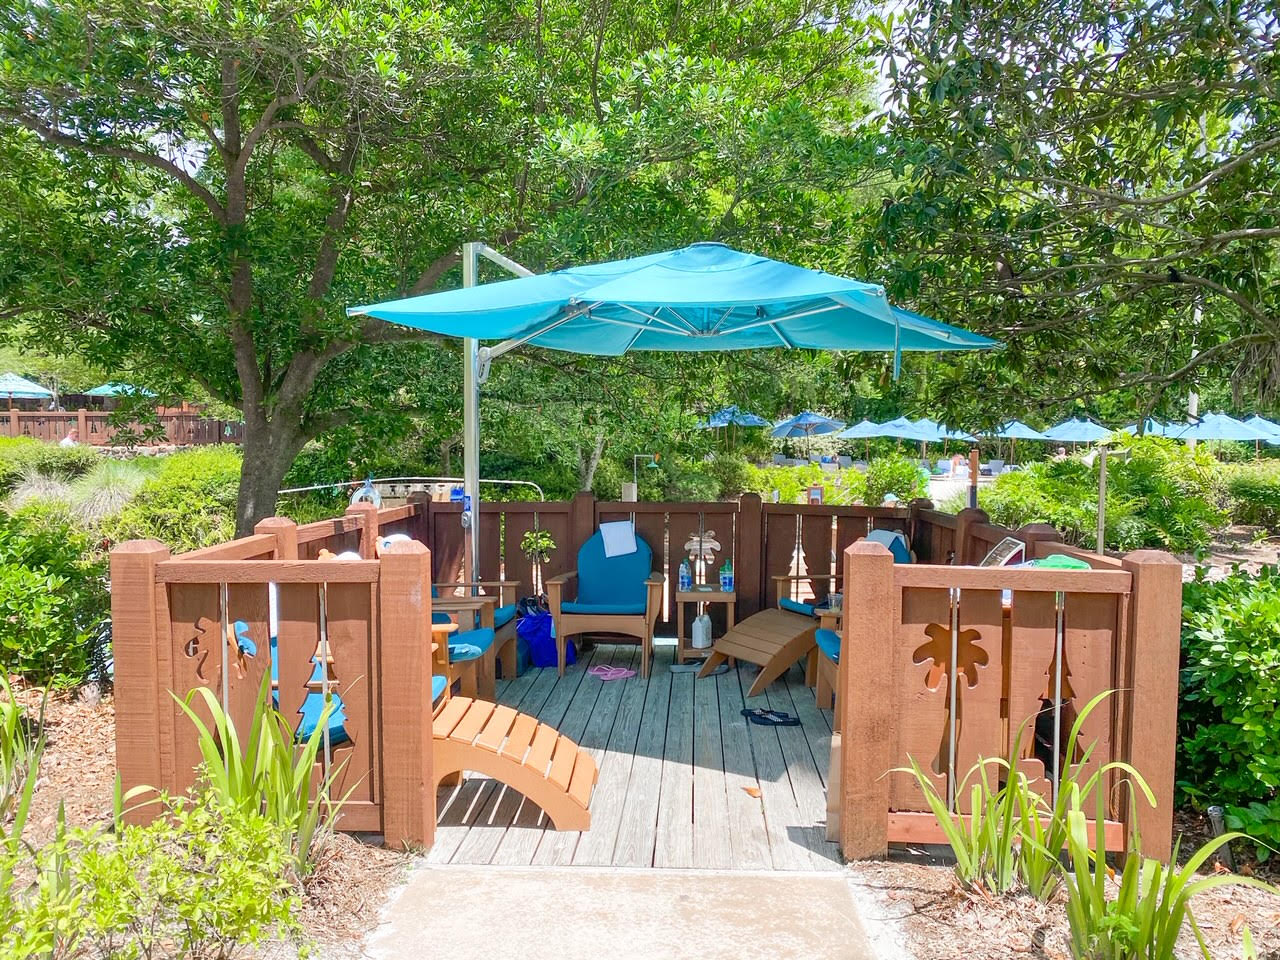 patio with a blue umbrella, lounge chairs, and trees